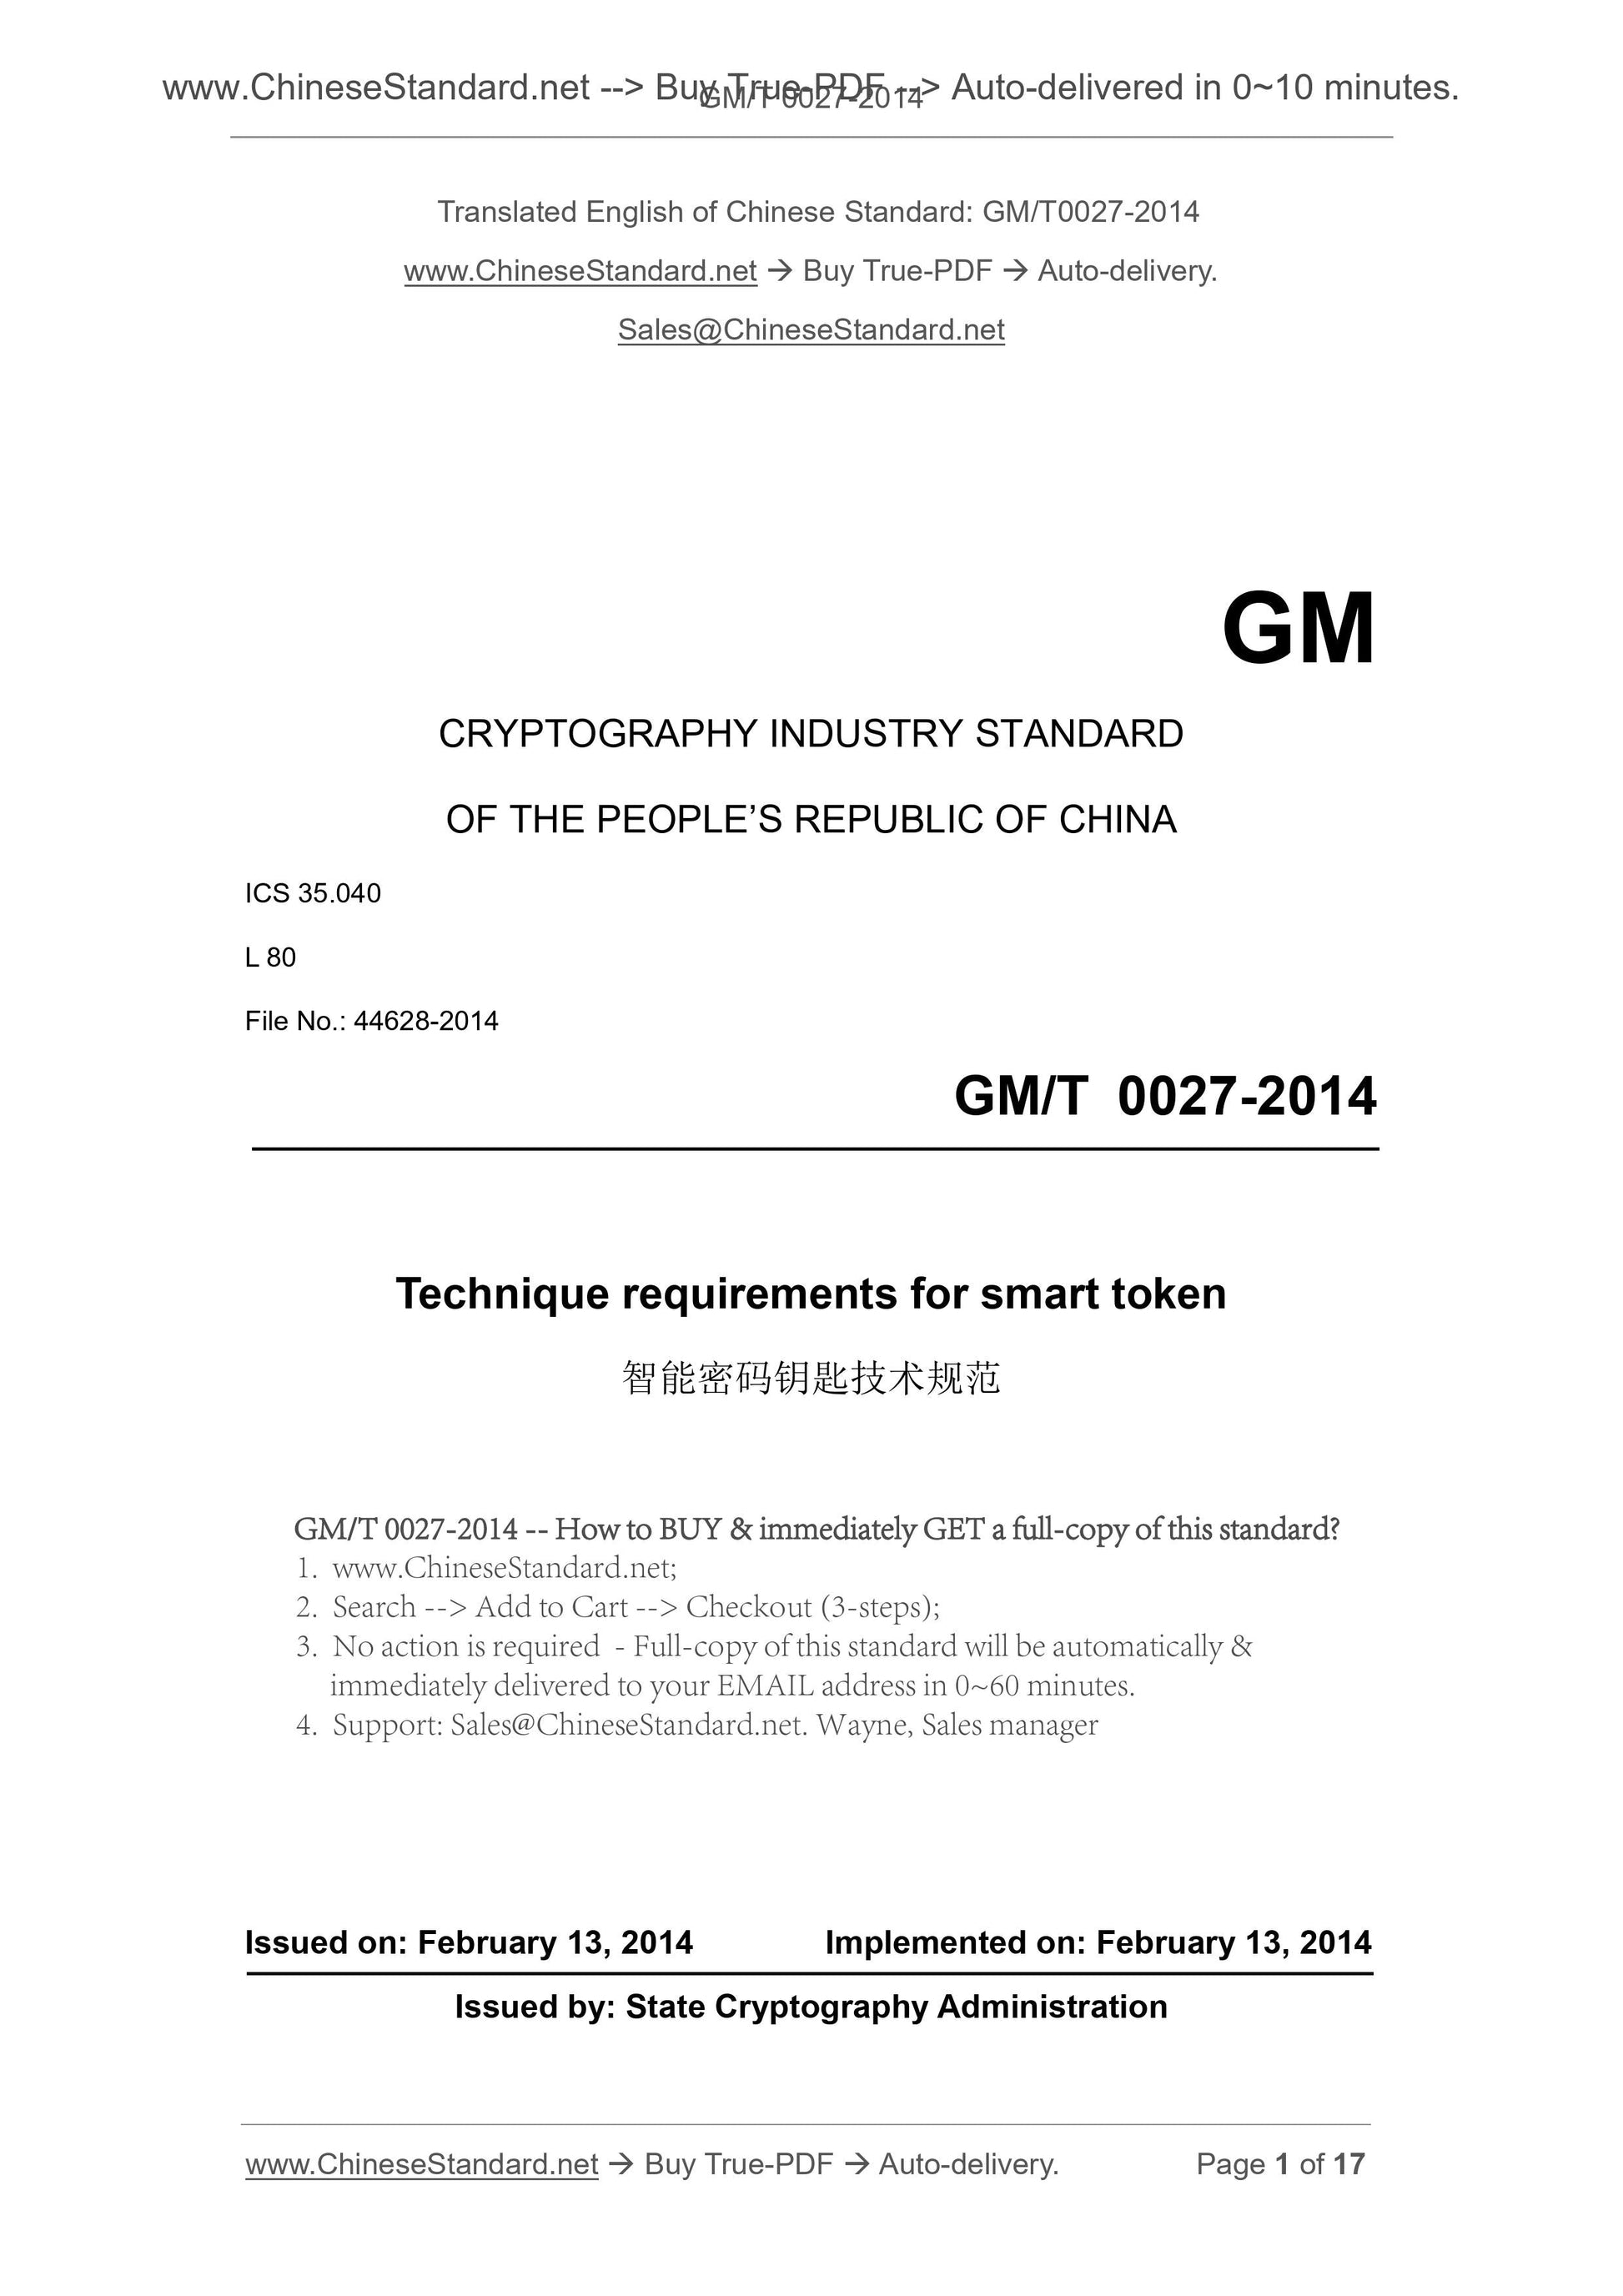 GM/T 0027-2014 Page 1